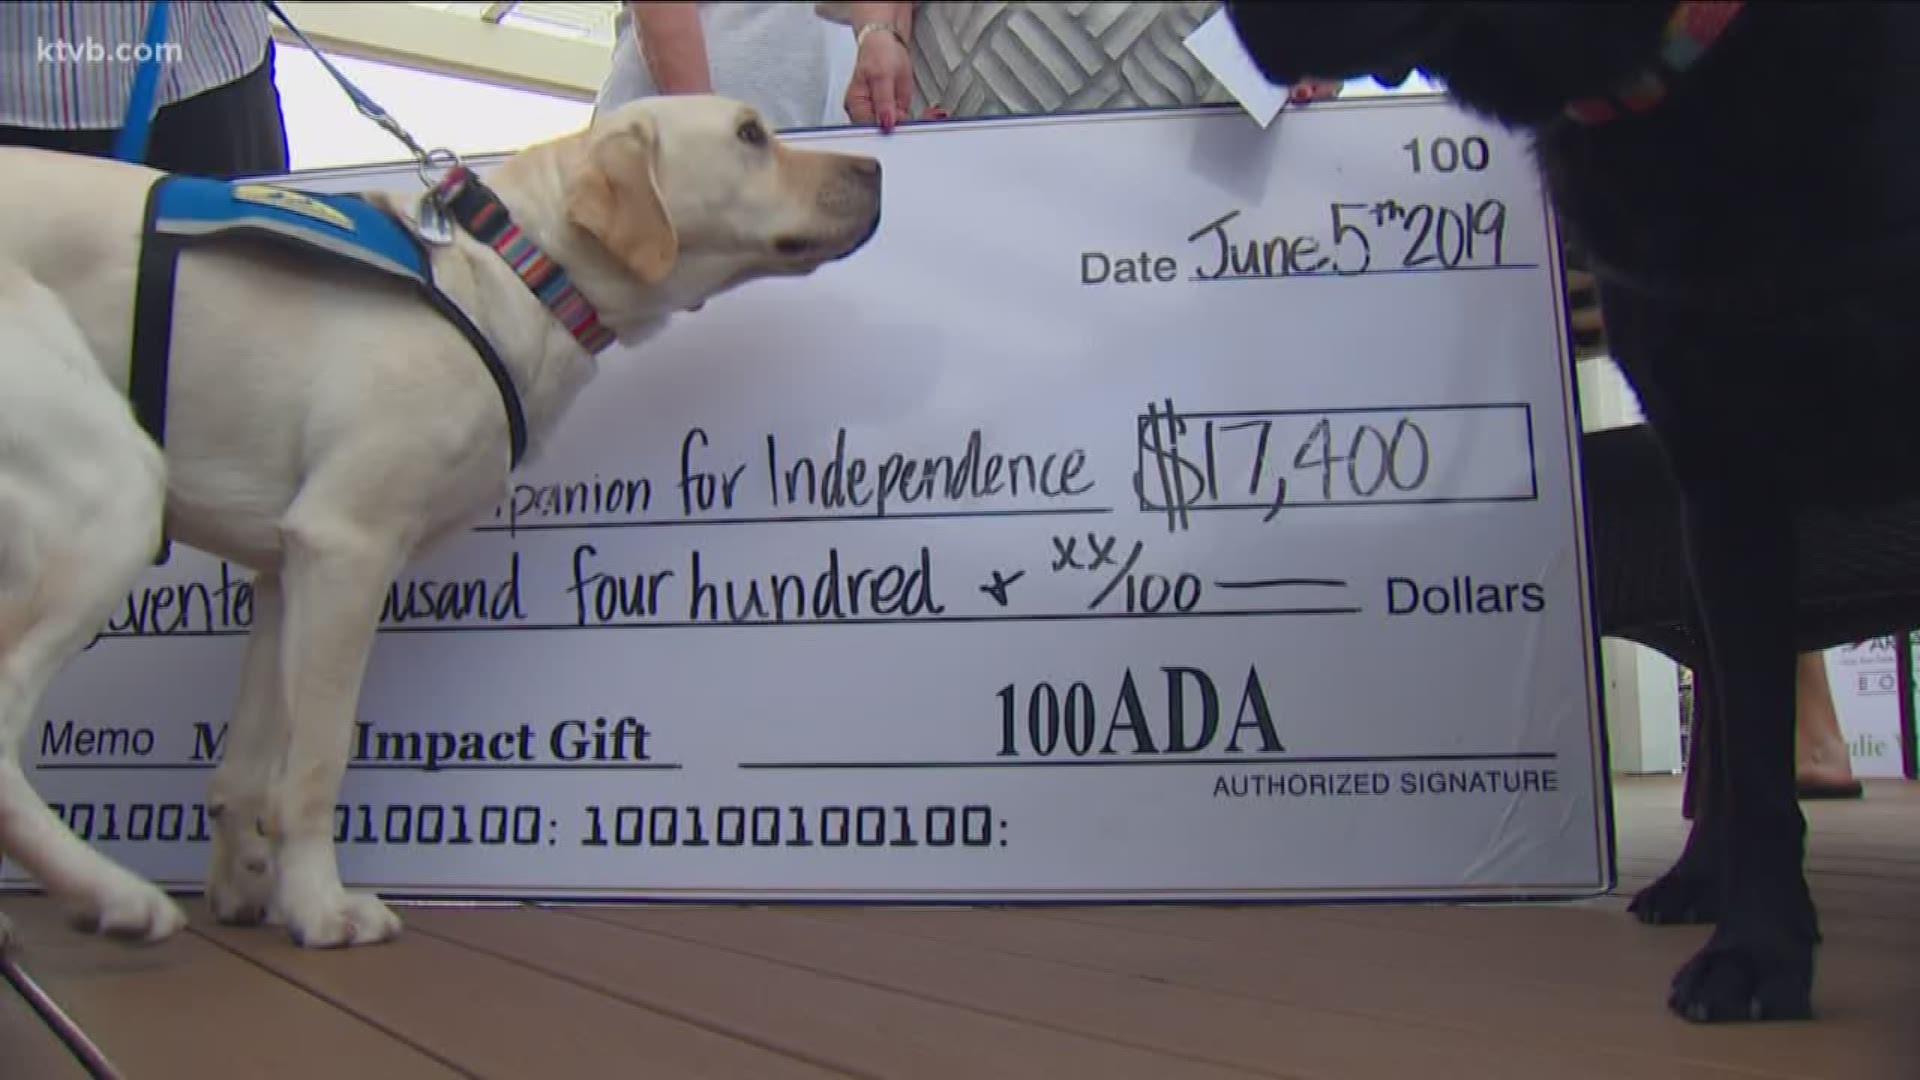 This year, Canine Companions for Independence was the big winner, with a donation of over more than $17,000.